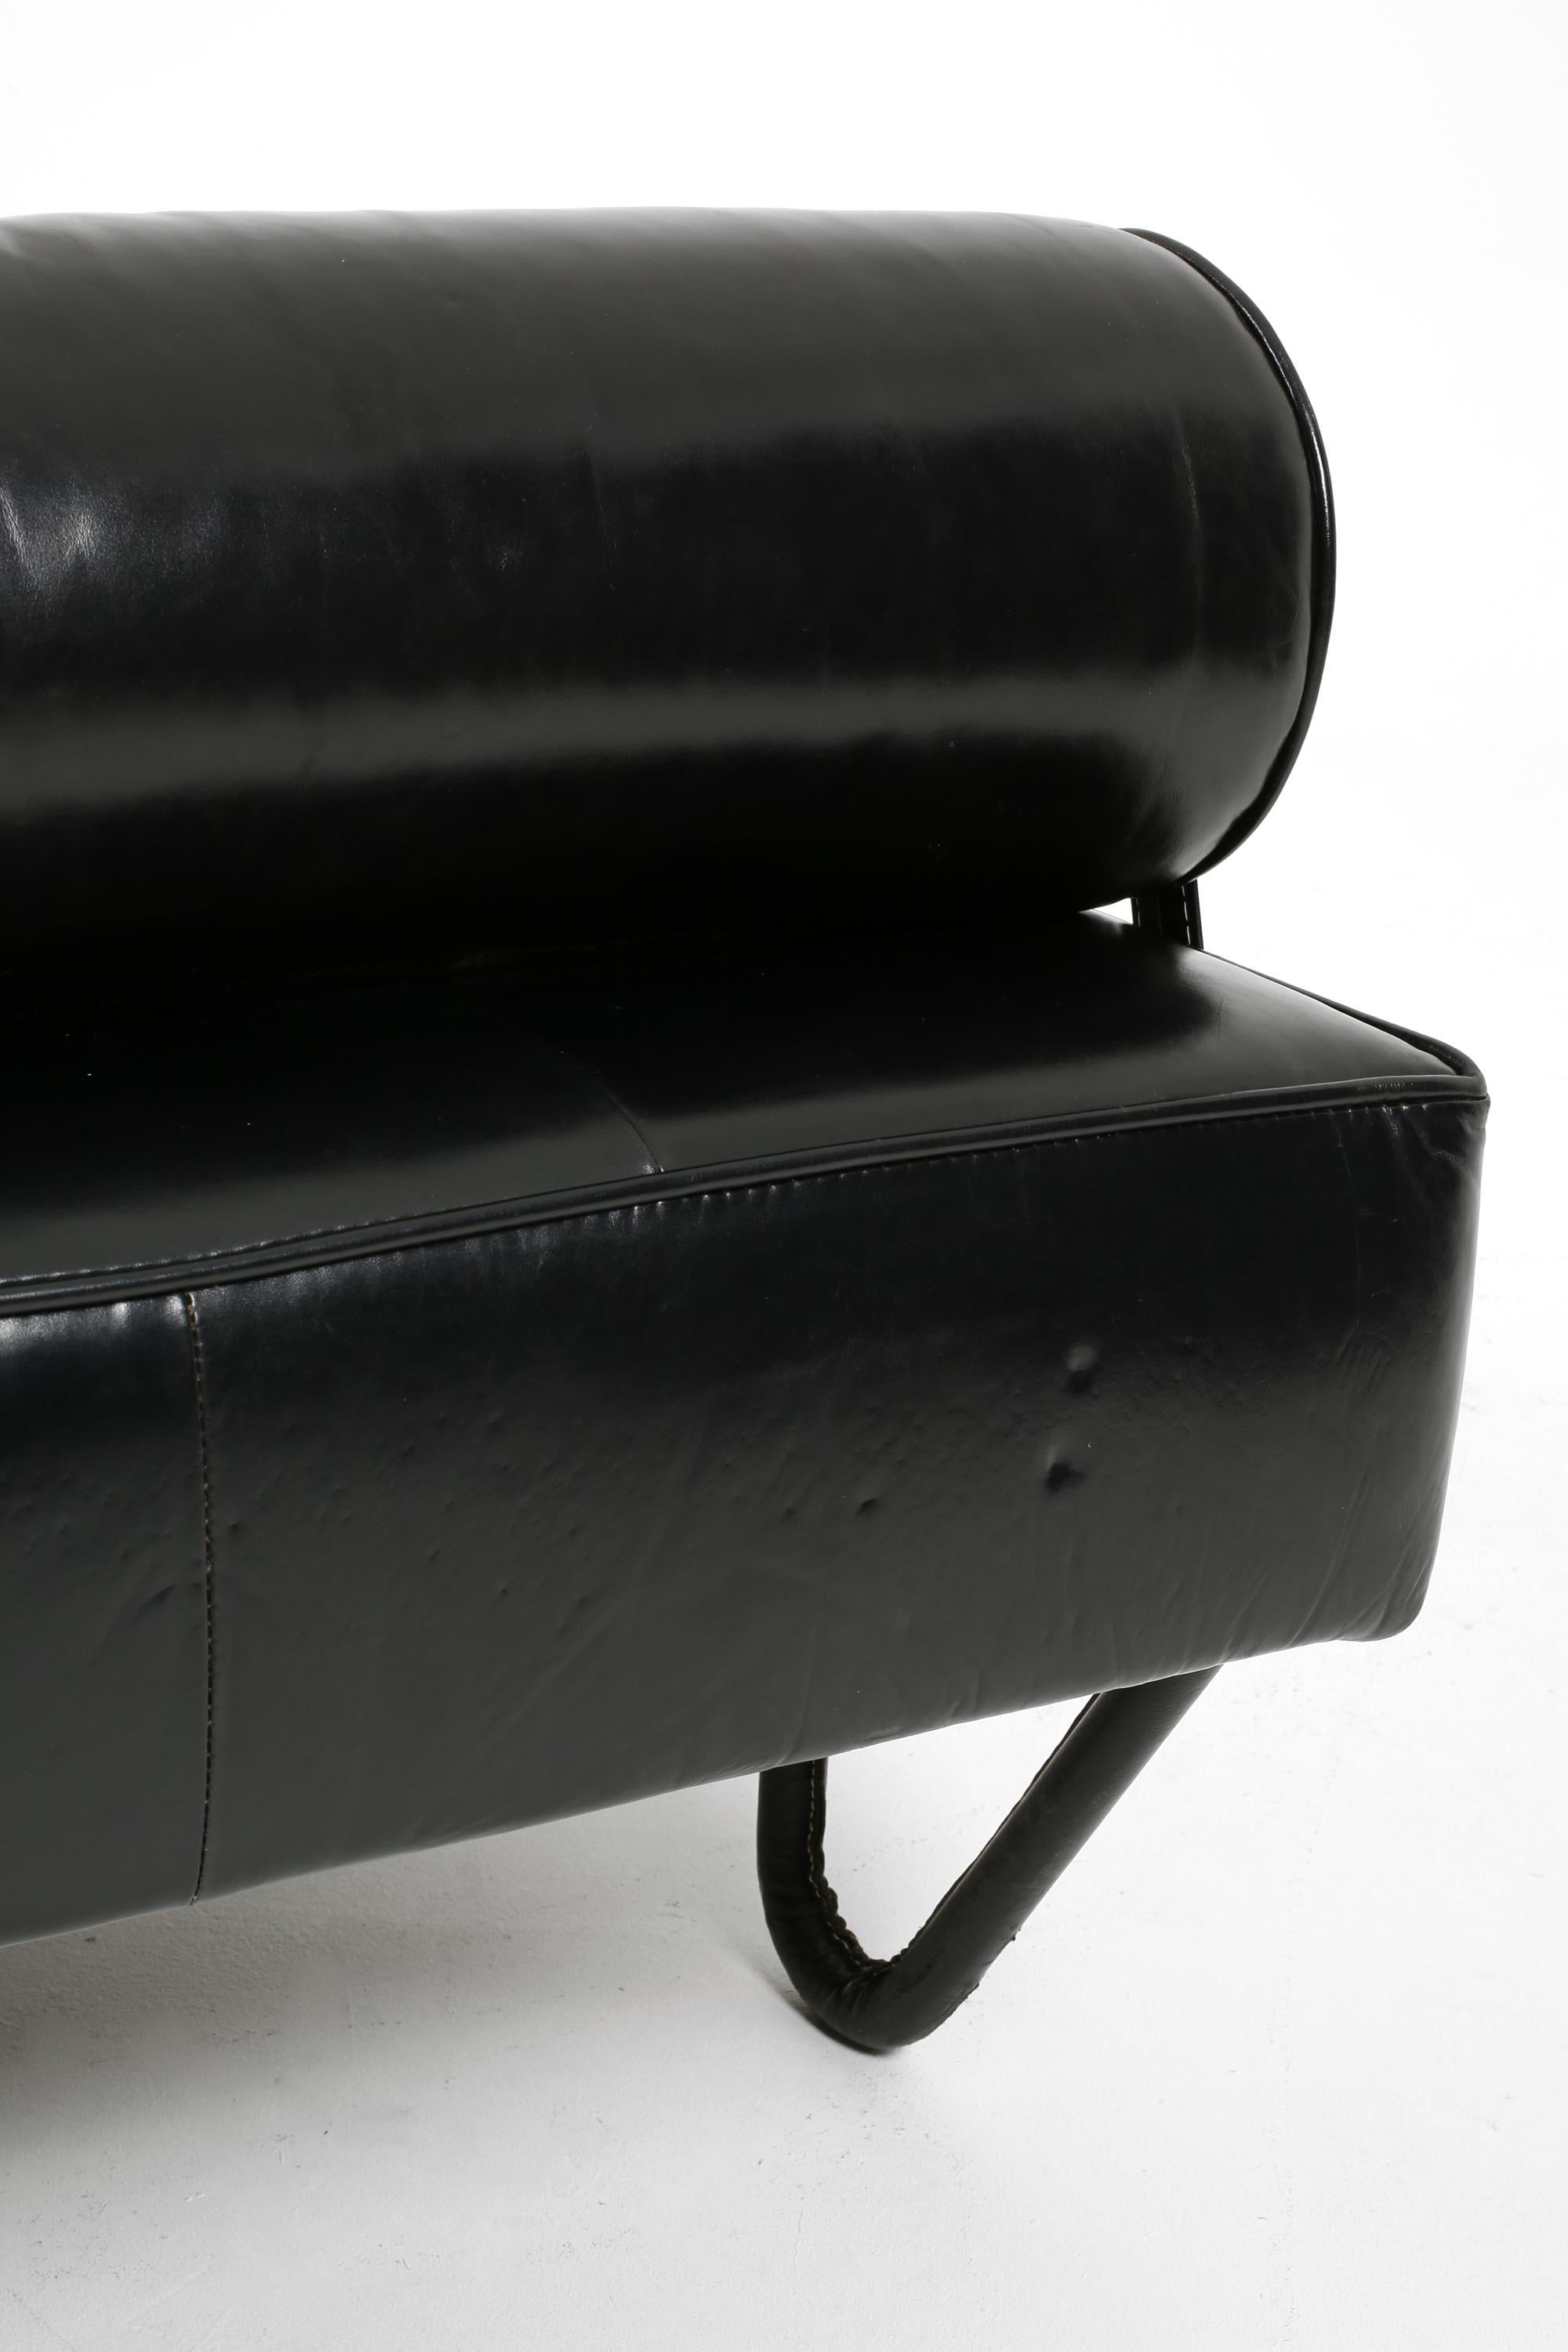 Steel Black Leather Daybed by Jacques Adnet